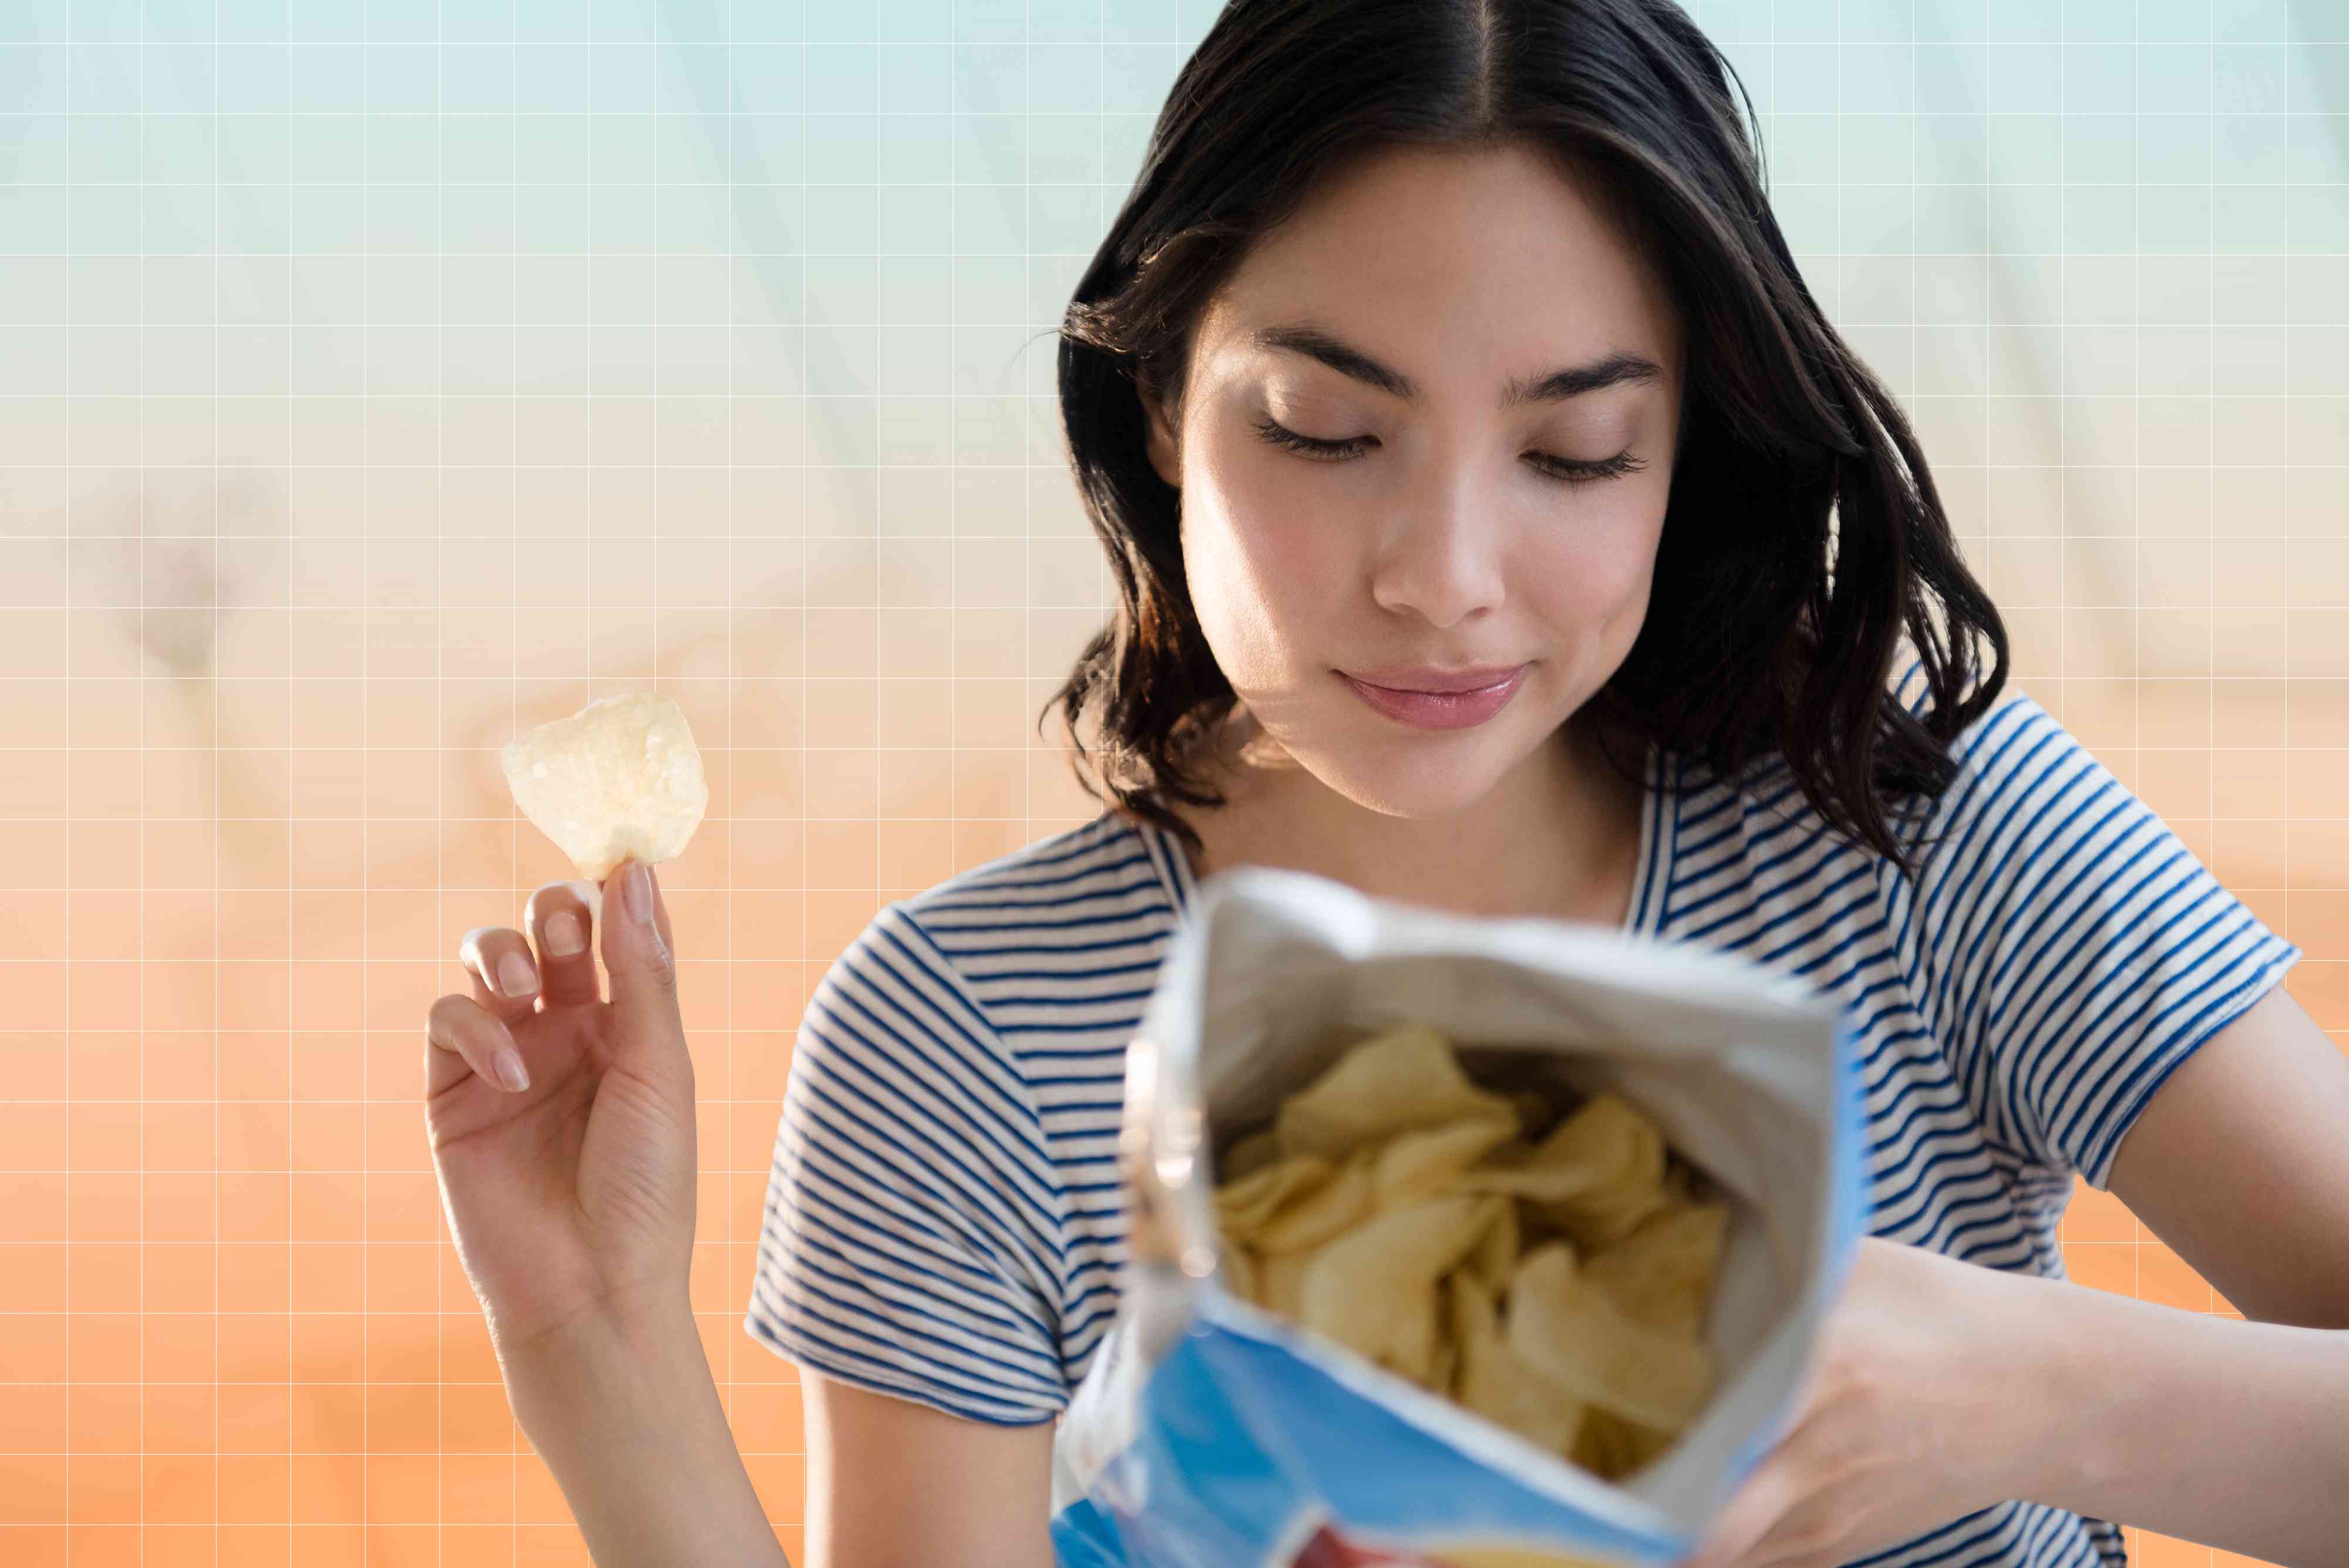 are baked chips healthier for you? here's what a dietitian says